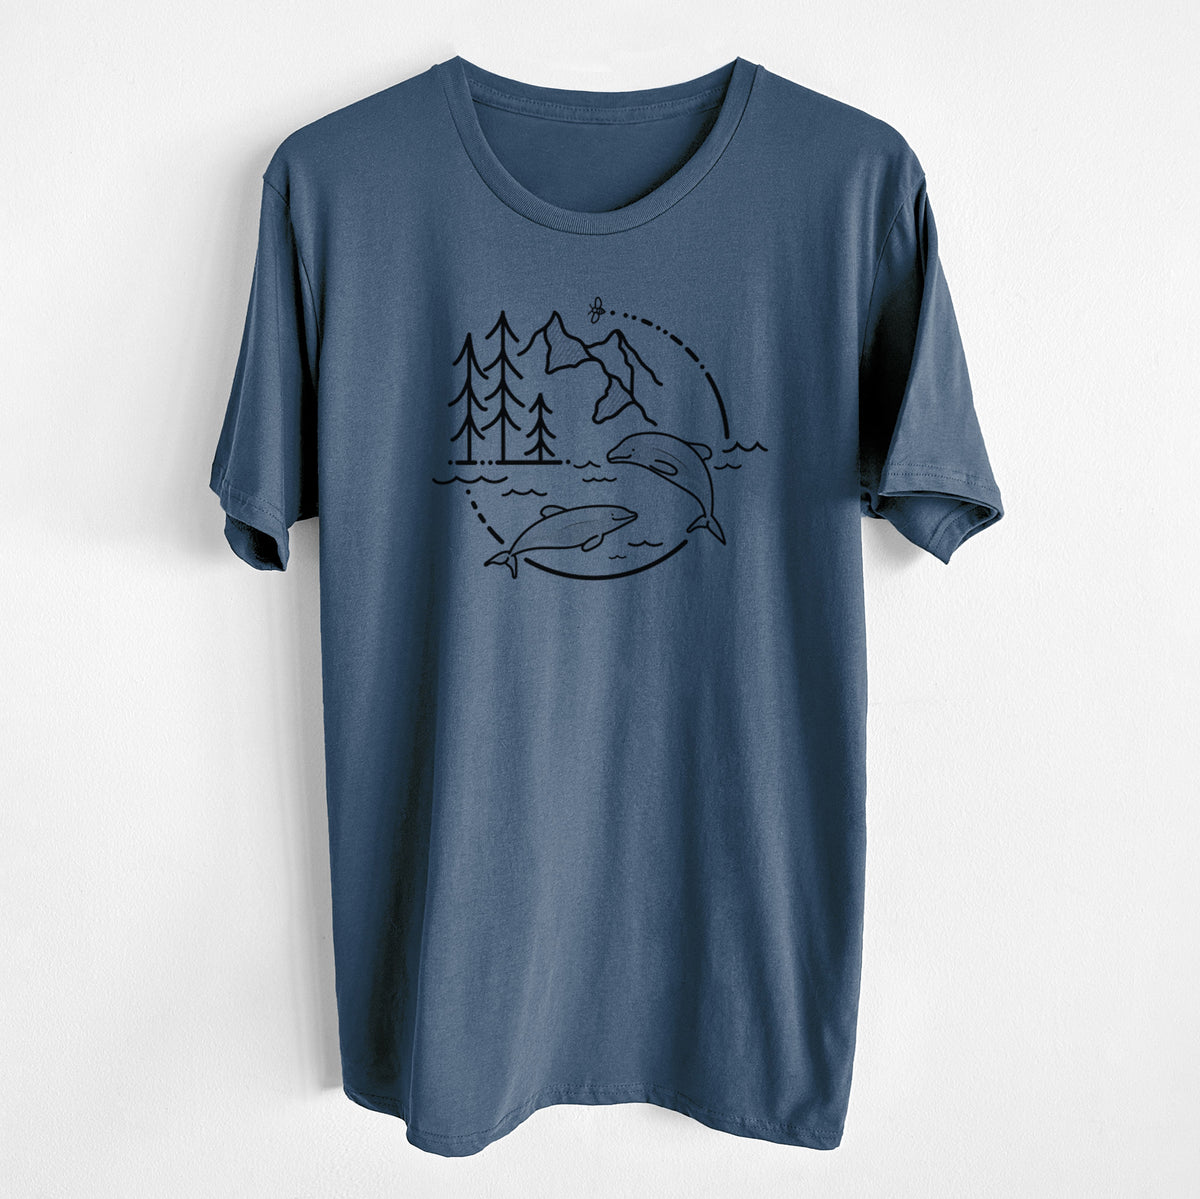 It&#39;s All Connected - Maui Dolphins - Unisex Crewneck - Made in USA - 100% Organic Cotton